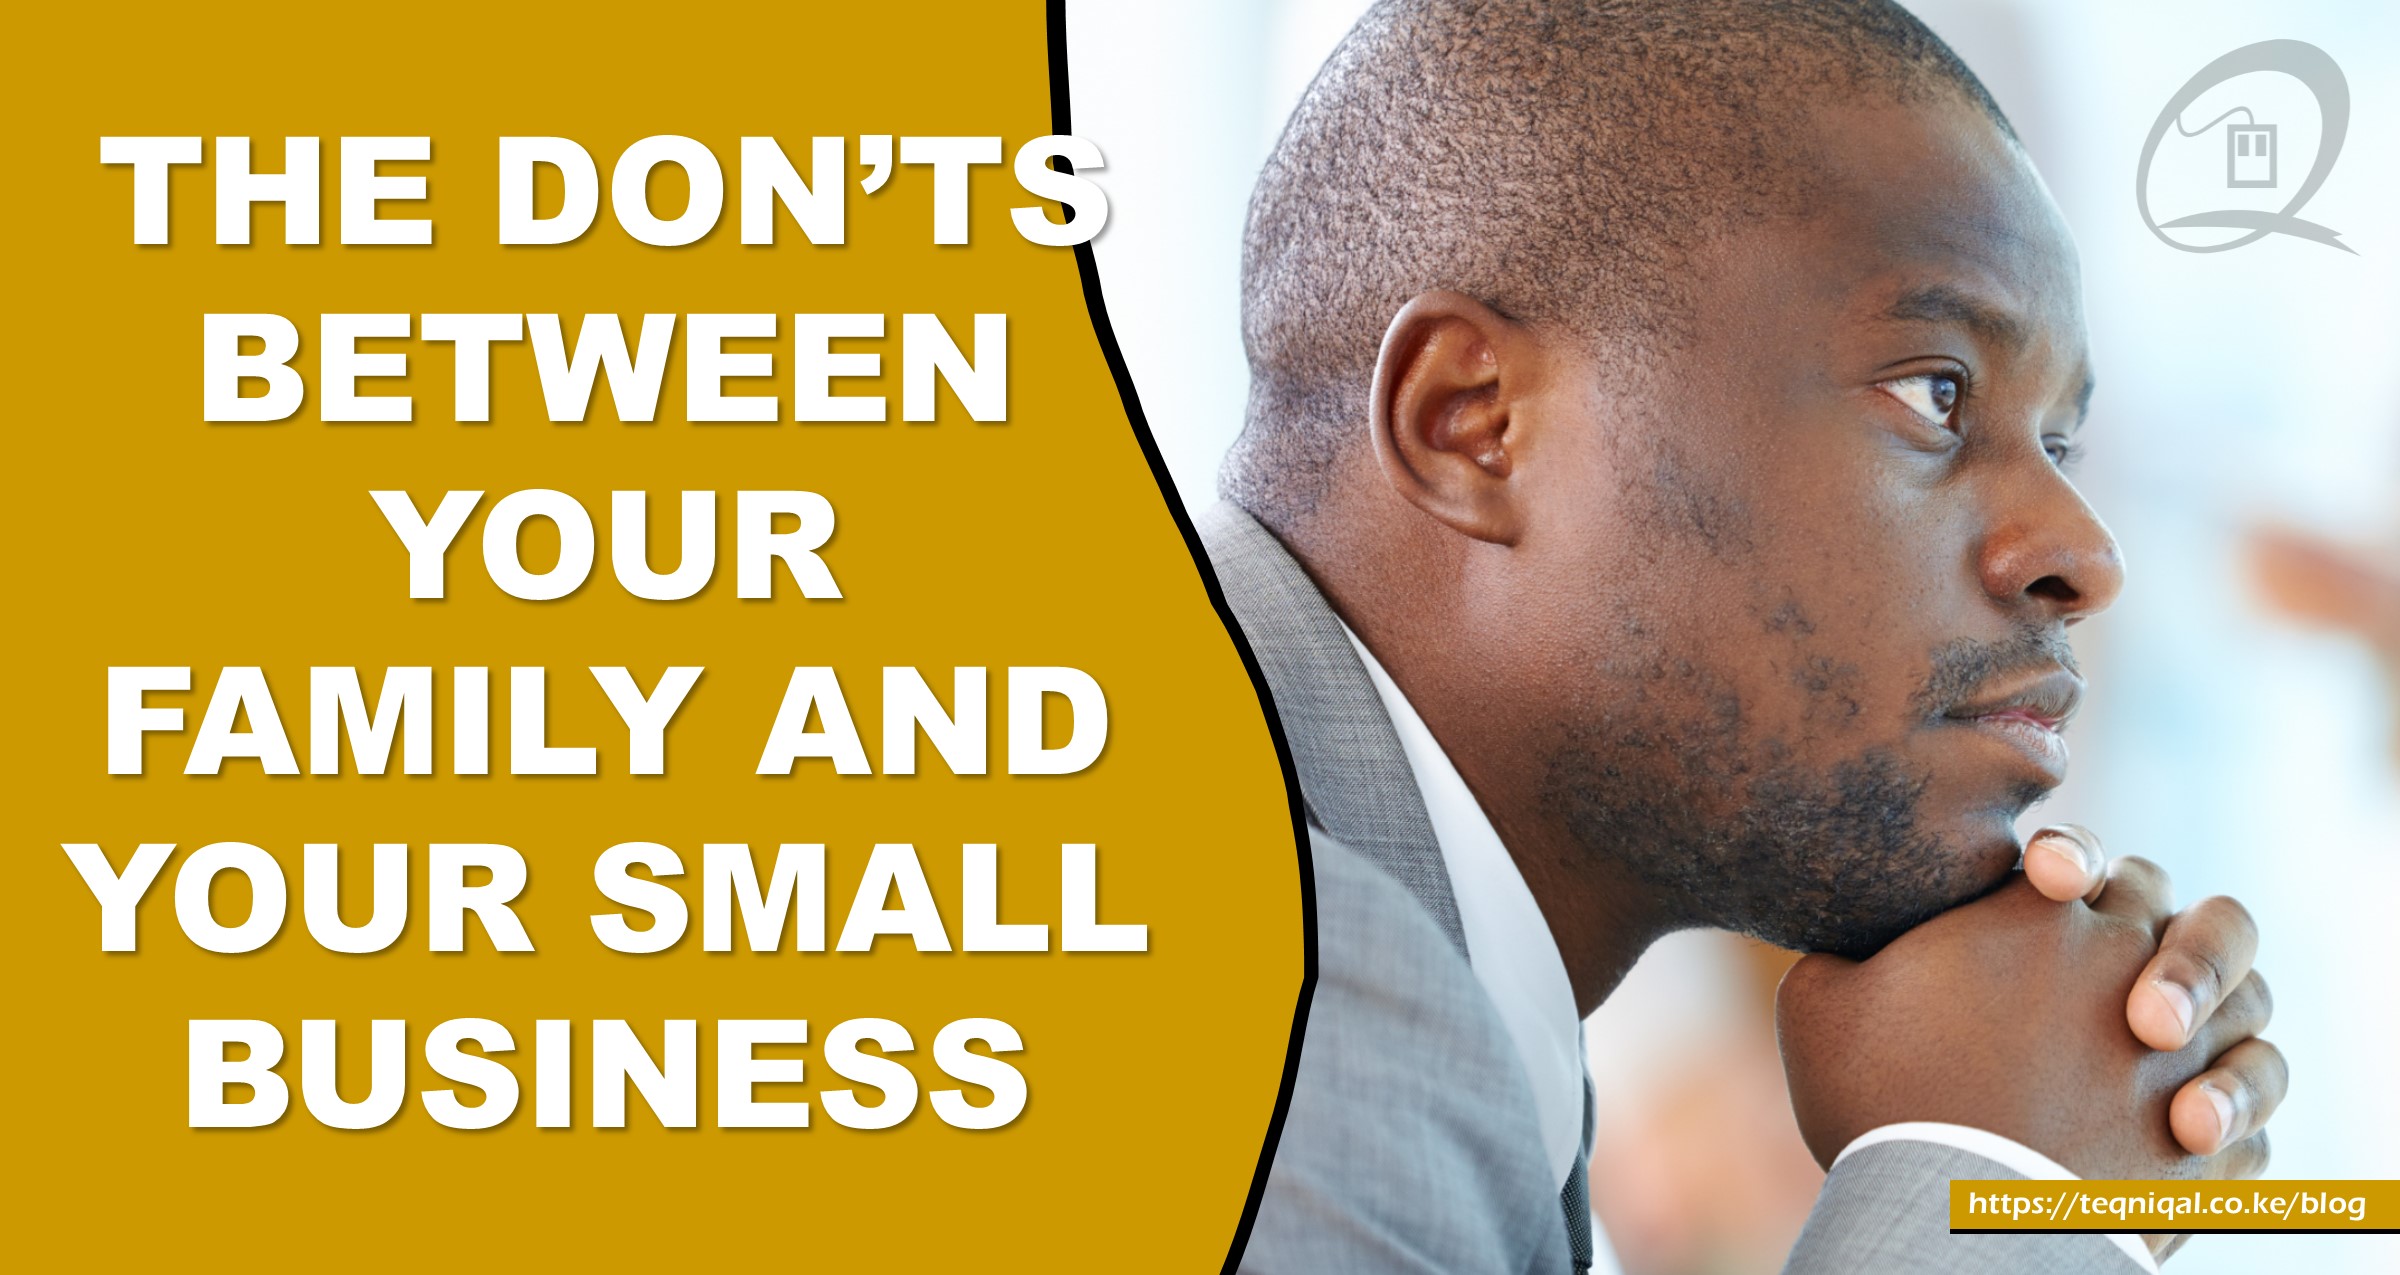 The Don’ts Between Your Family And Your Small Business